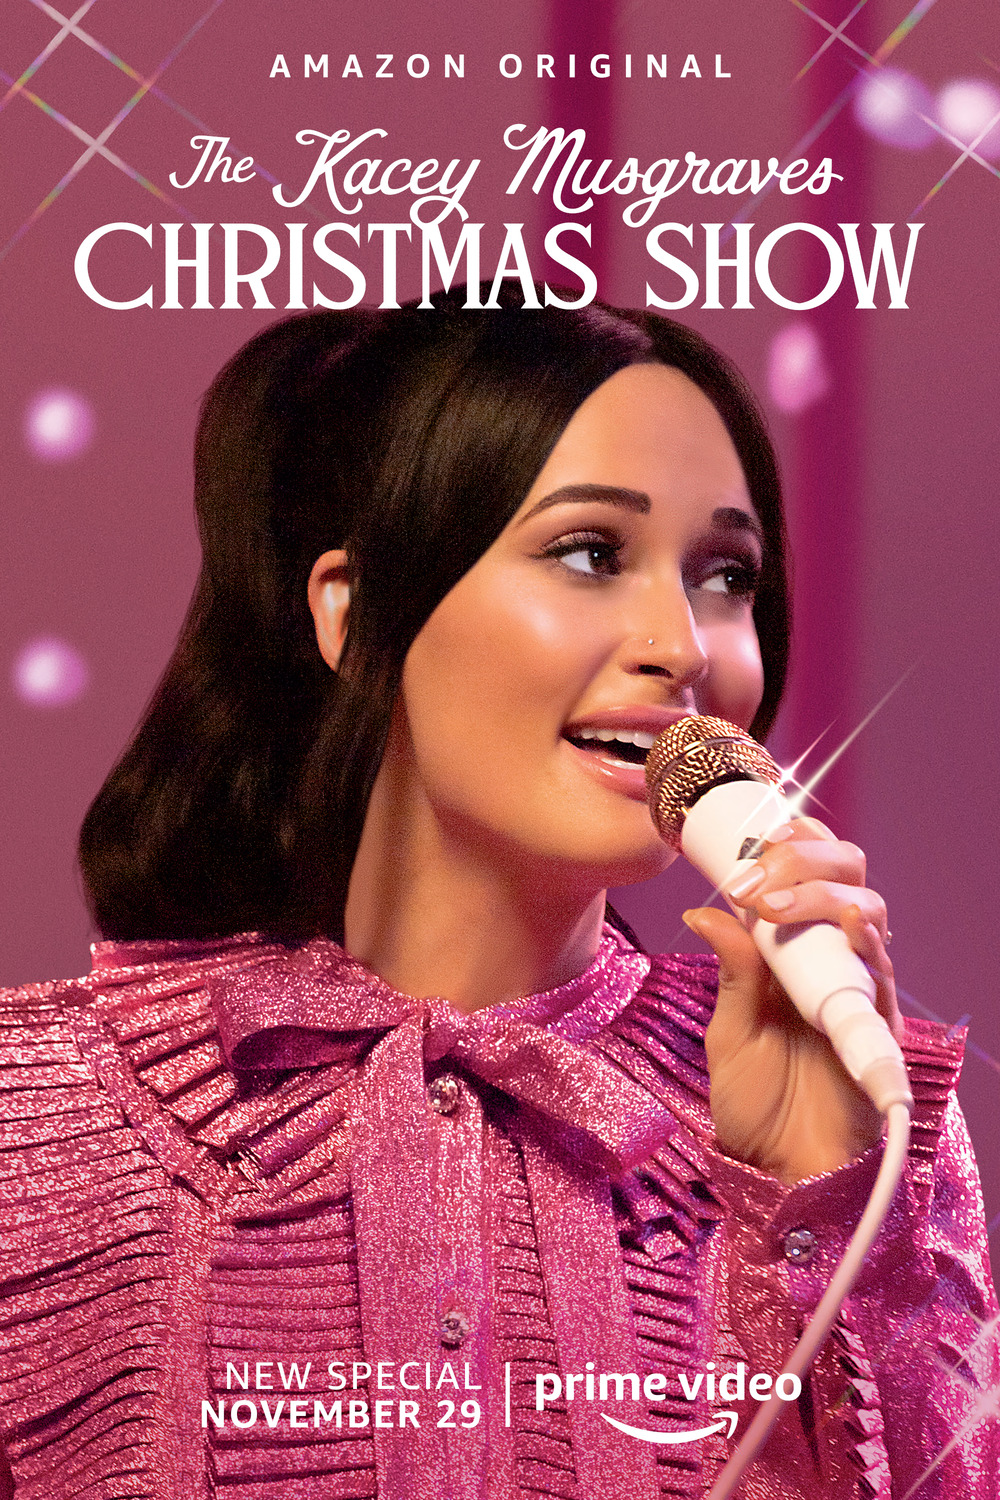 Extra Large TV Poster Image for The Kacey Musgraves Christmas Show 